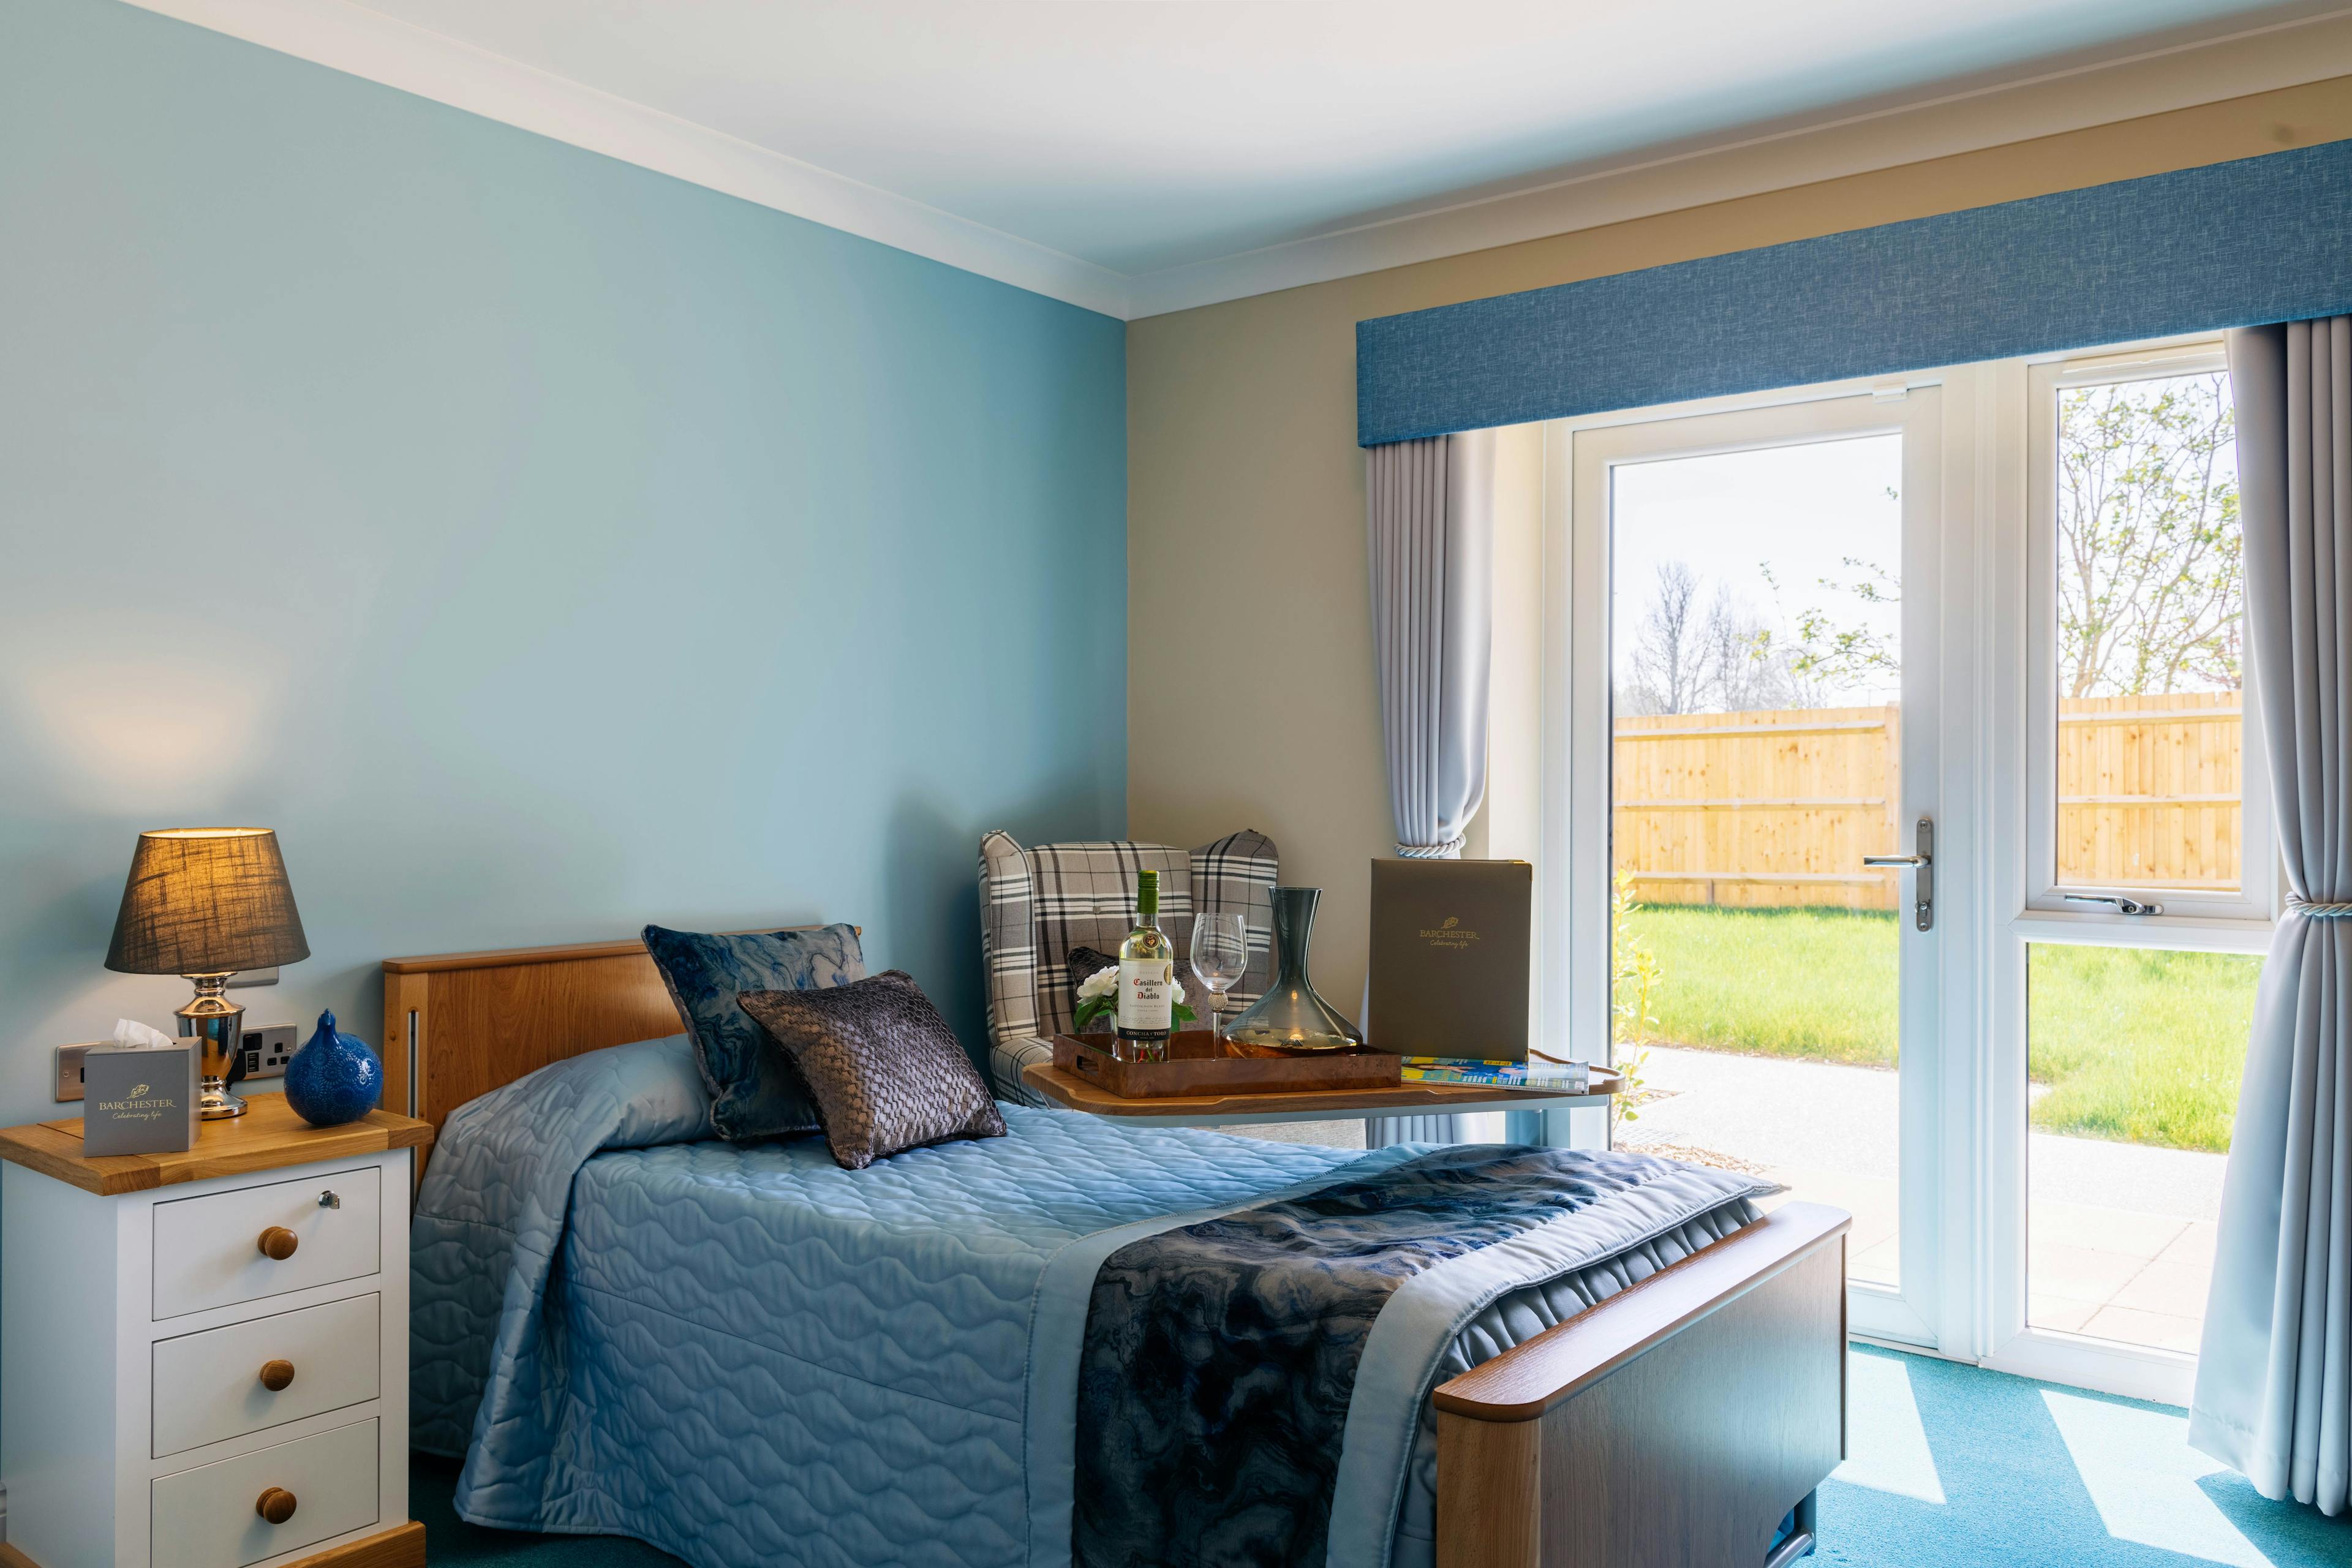 Bedroom at Snowdrop Place Care Home in Southampton, Hampshire